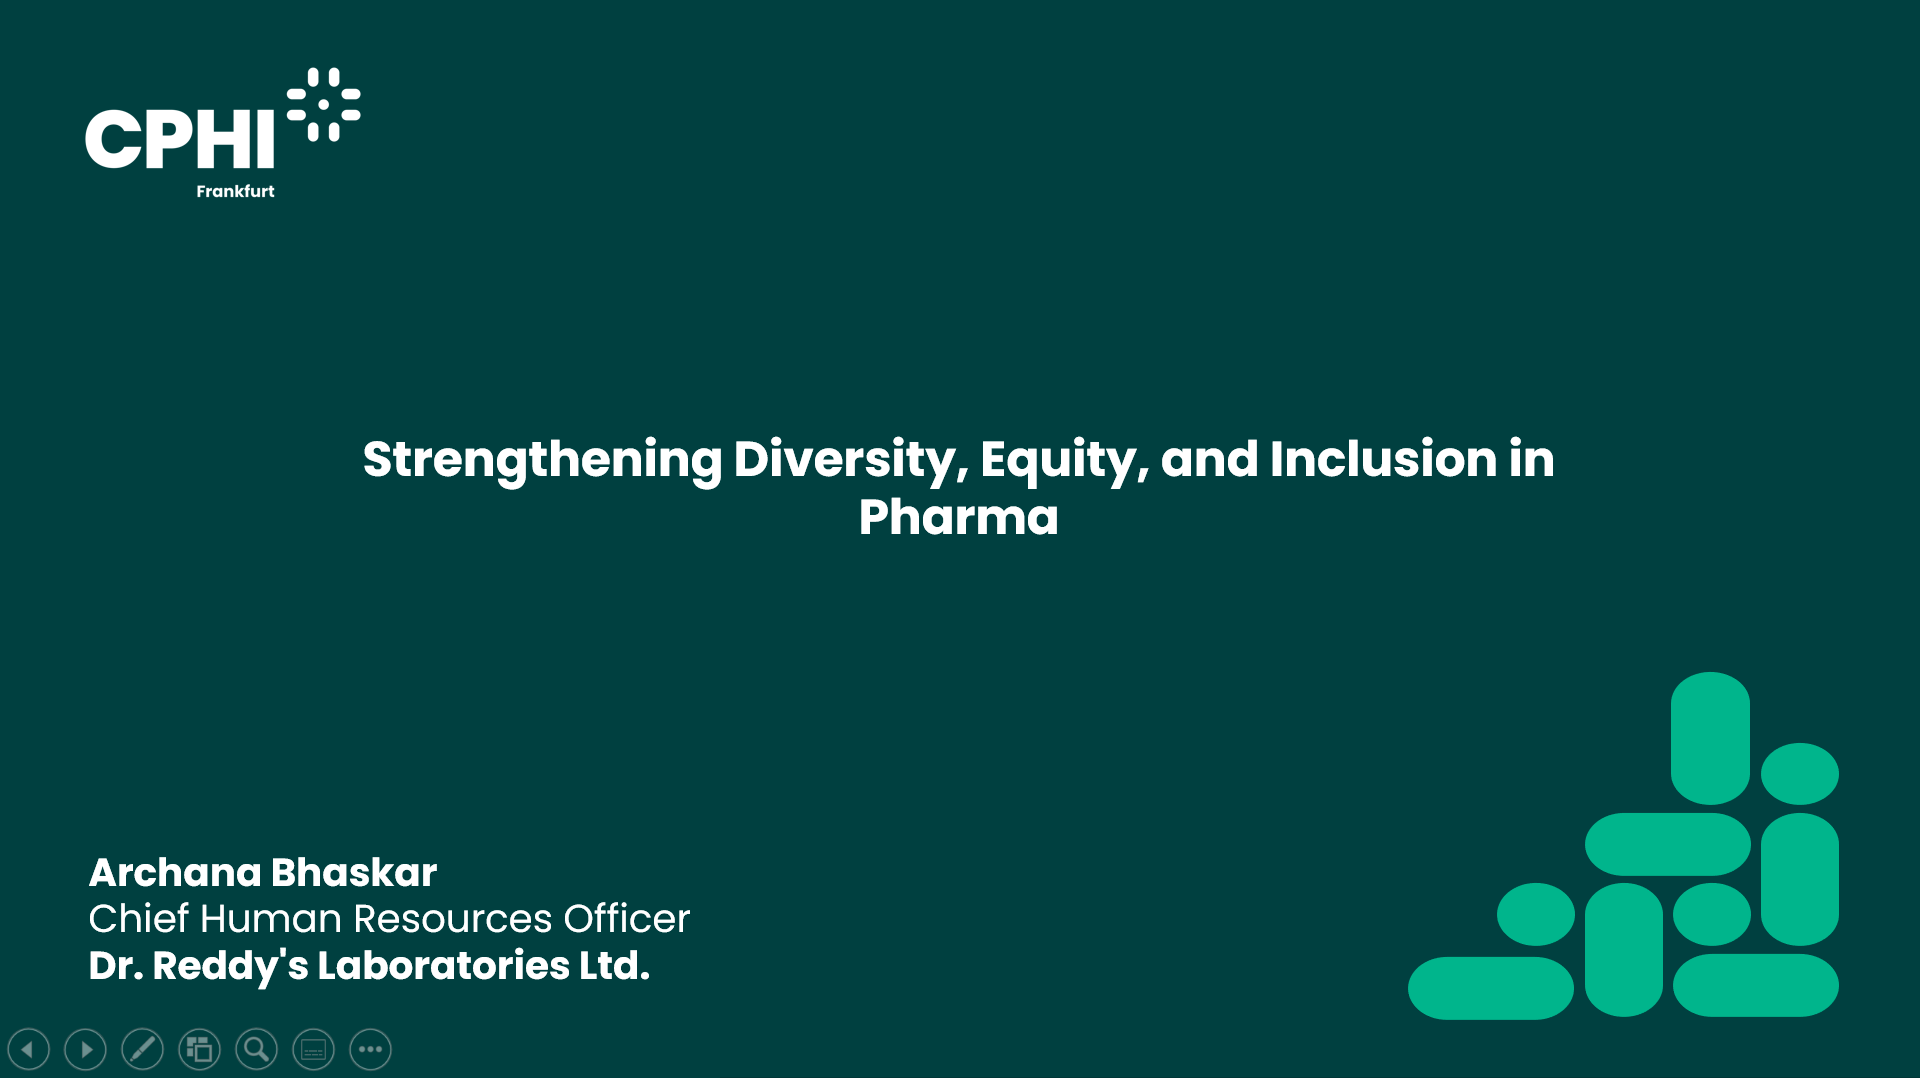 Strengthening Diversity, Equity, and Inclusion in Pharma